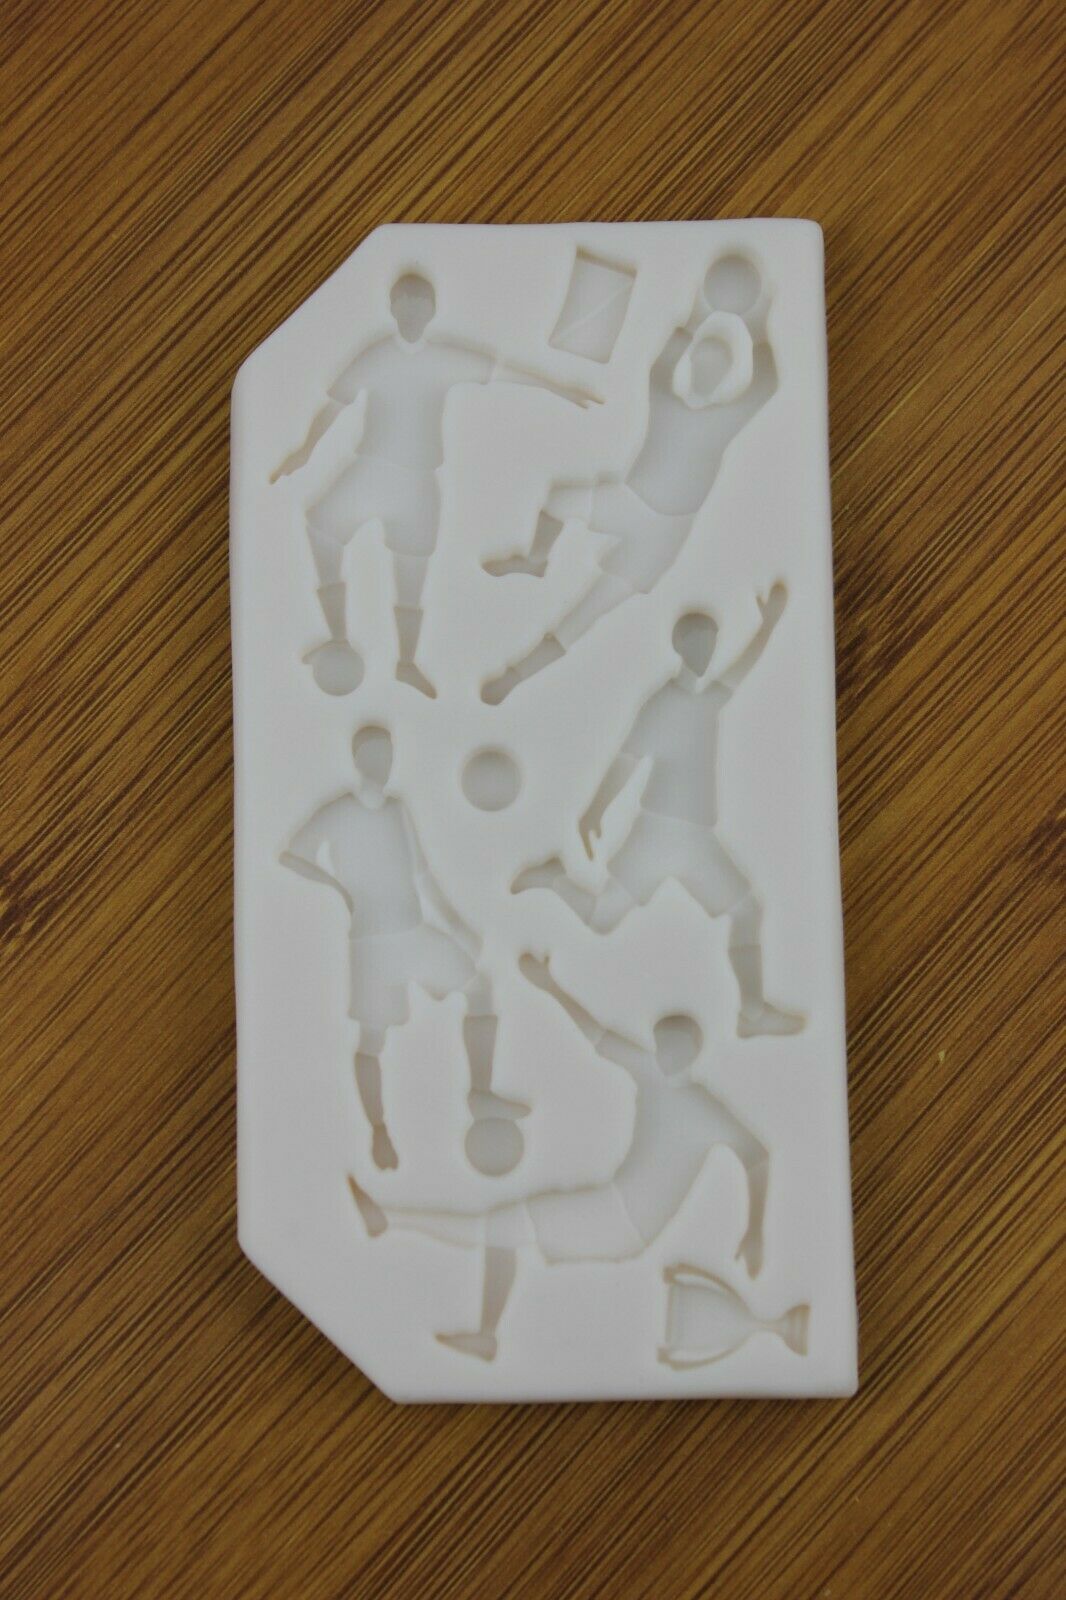 attachment-https://www.cupcakeaddicts.co.uk/wp-content/uploads/imported/7/Footballer-Silicone-mould-Icing-Cake-Football-Player-Soccer-324333794027.jpg